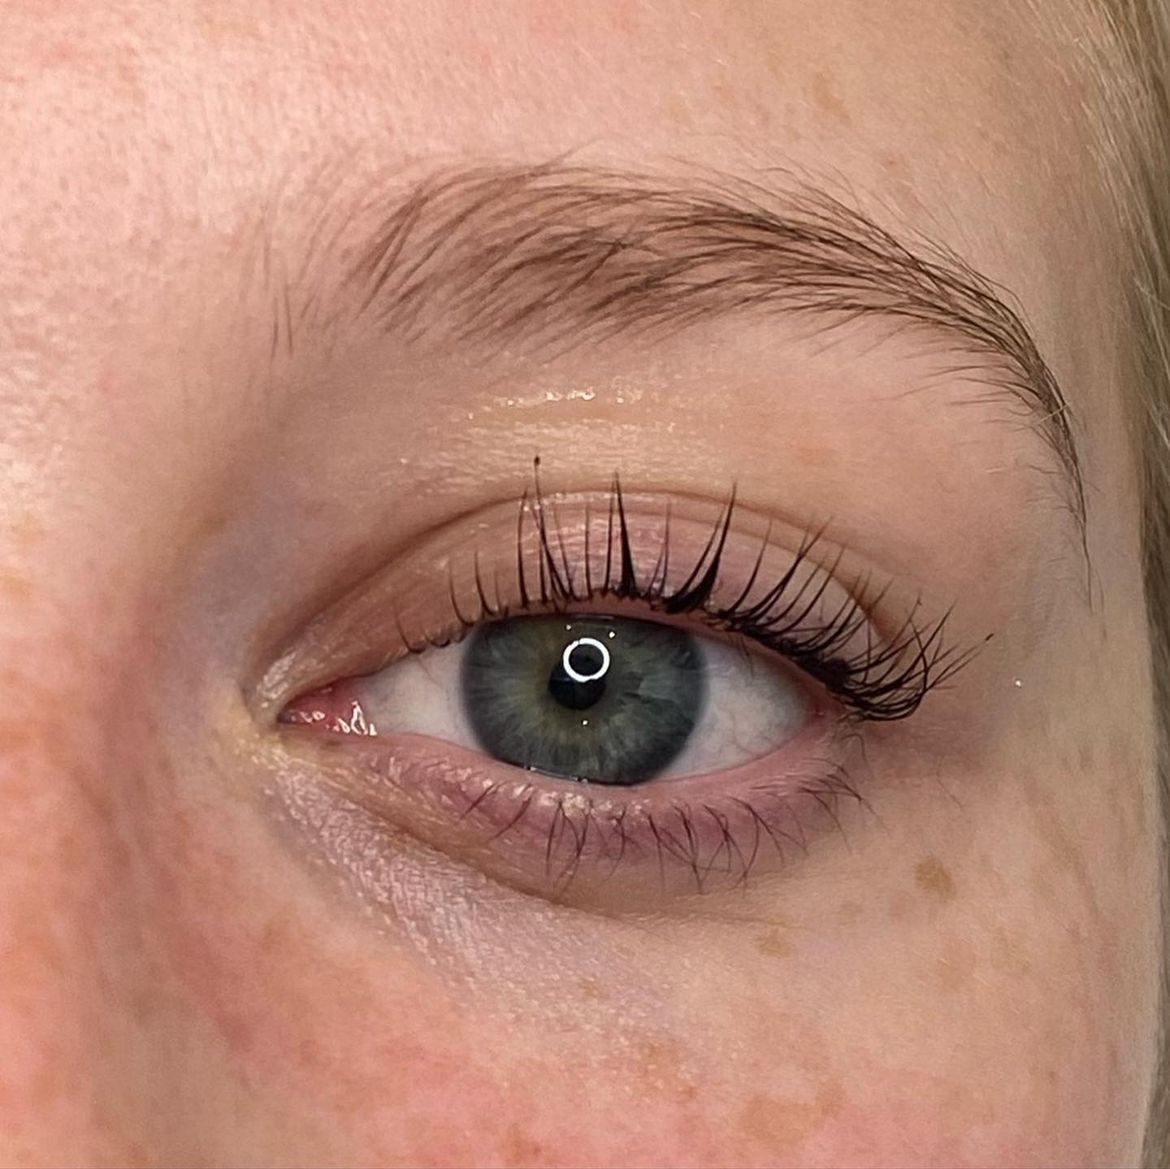 Looking for naturally lifted, gorgeous lashes that last? Look no further than our LVL Lash Lift! LVL stands for &quot;Length, Volume, Lift&quot; and that's exactly what this amazing treatment delivers.

💛 Here's why you'll love an LVL Lash Lift: 💛
